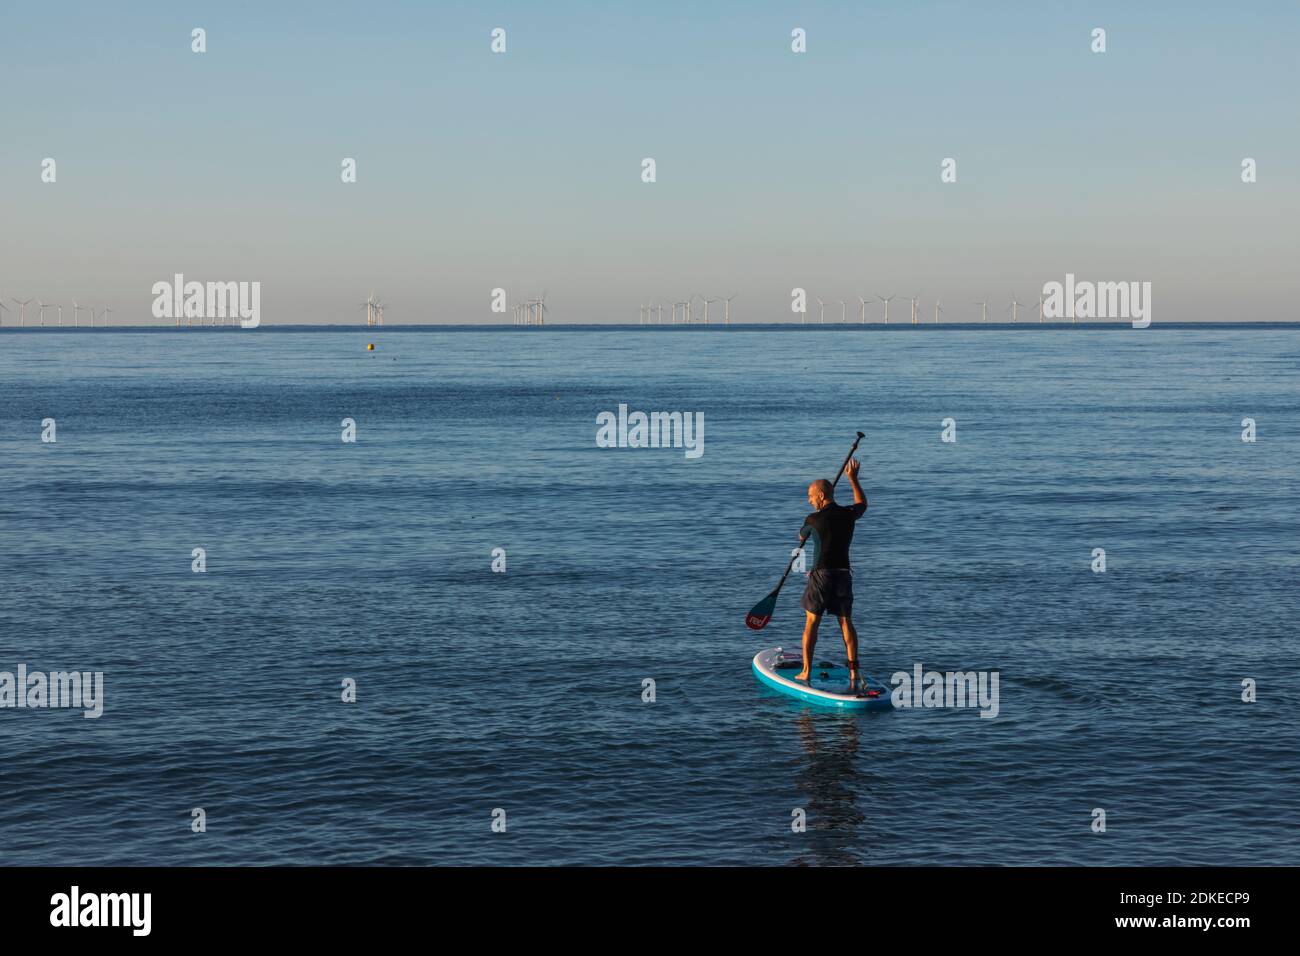 England, West Sussex, Worthing, Worthing Beach, Paddle Boarder on Calm Sea Stock Photo